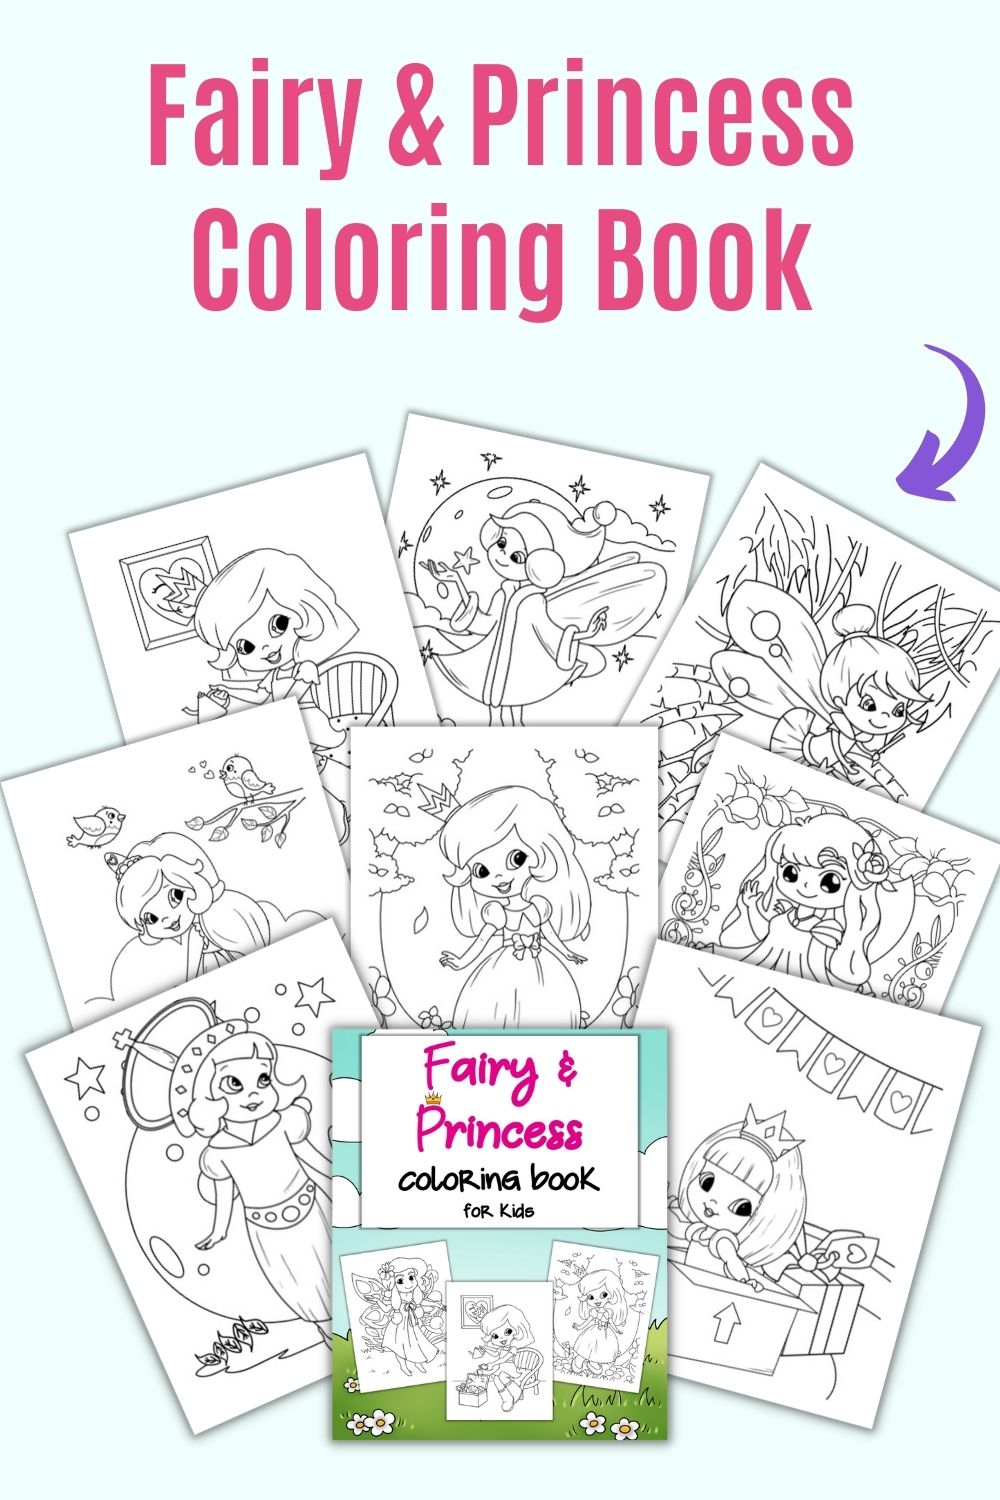 Fairy & Princess Coloring Book for Kids – The Artisan Life